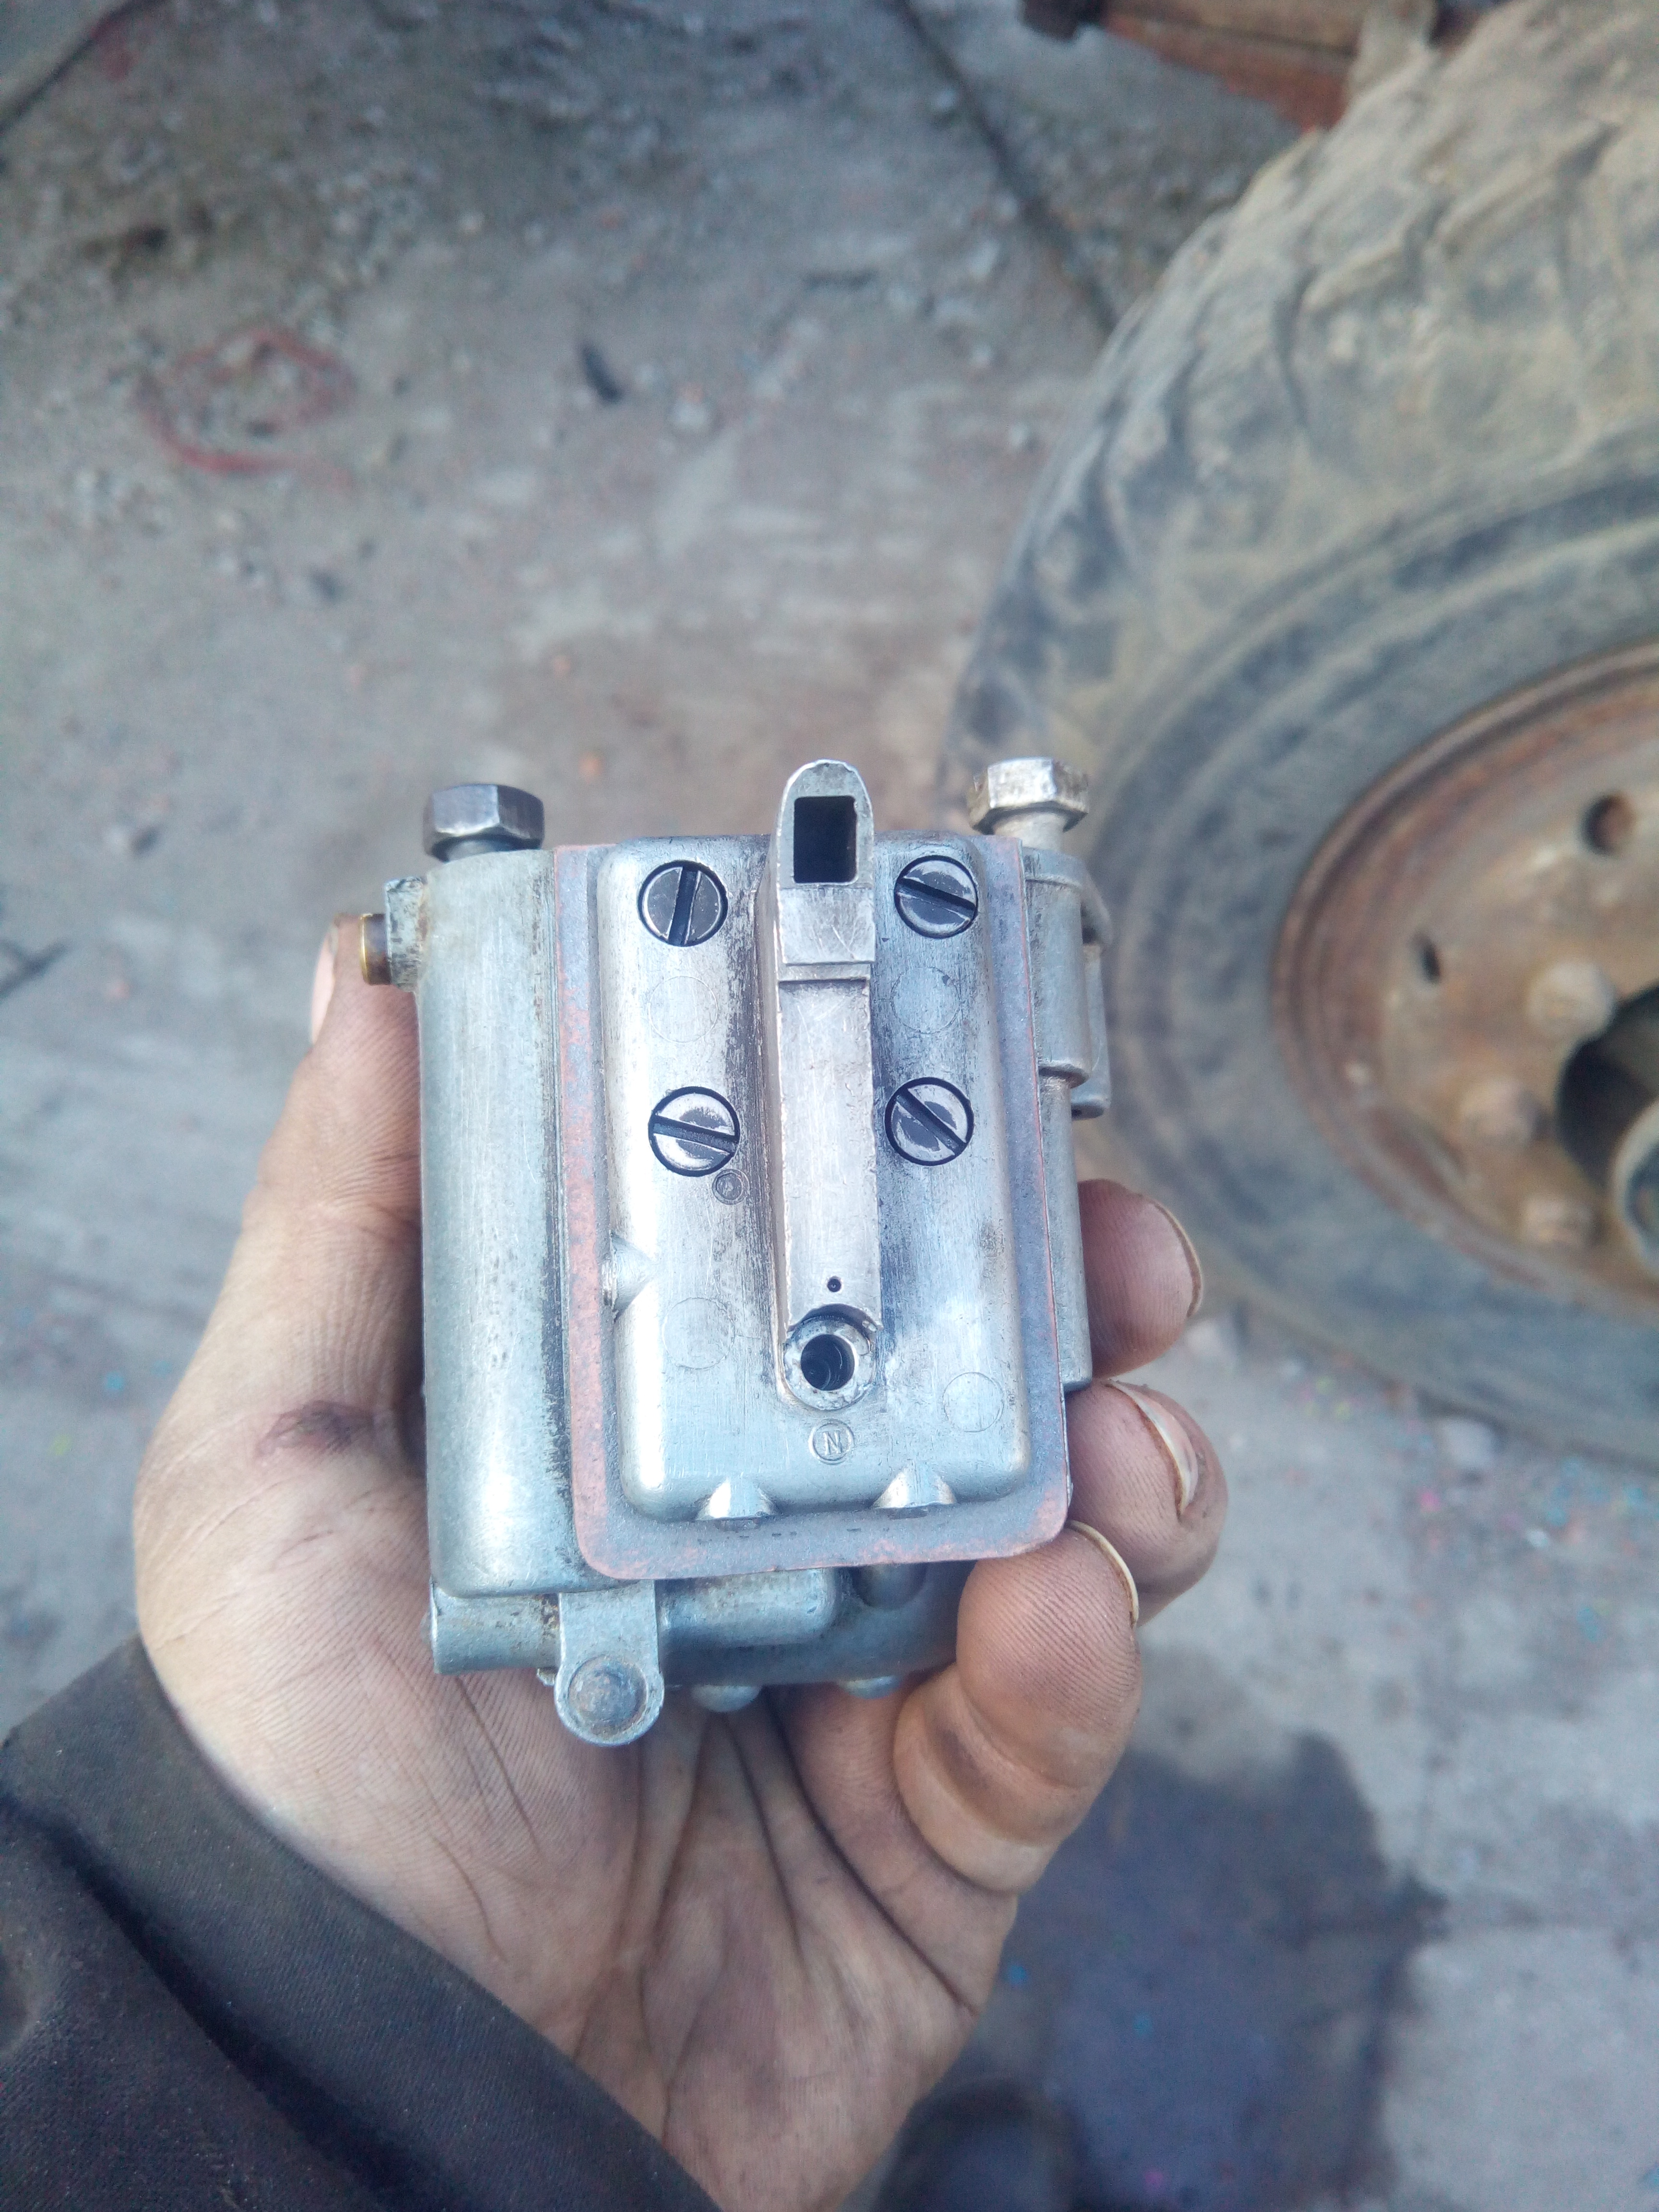 Same carburettor, with now only 4 screws in the metal plate. The
fifth screw, supposed to be in the bottom of the plate, beneath the
protrusion, is missing.